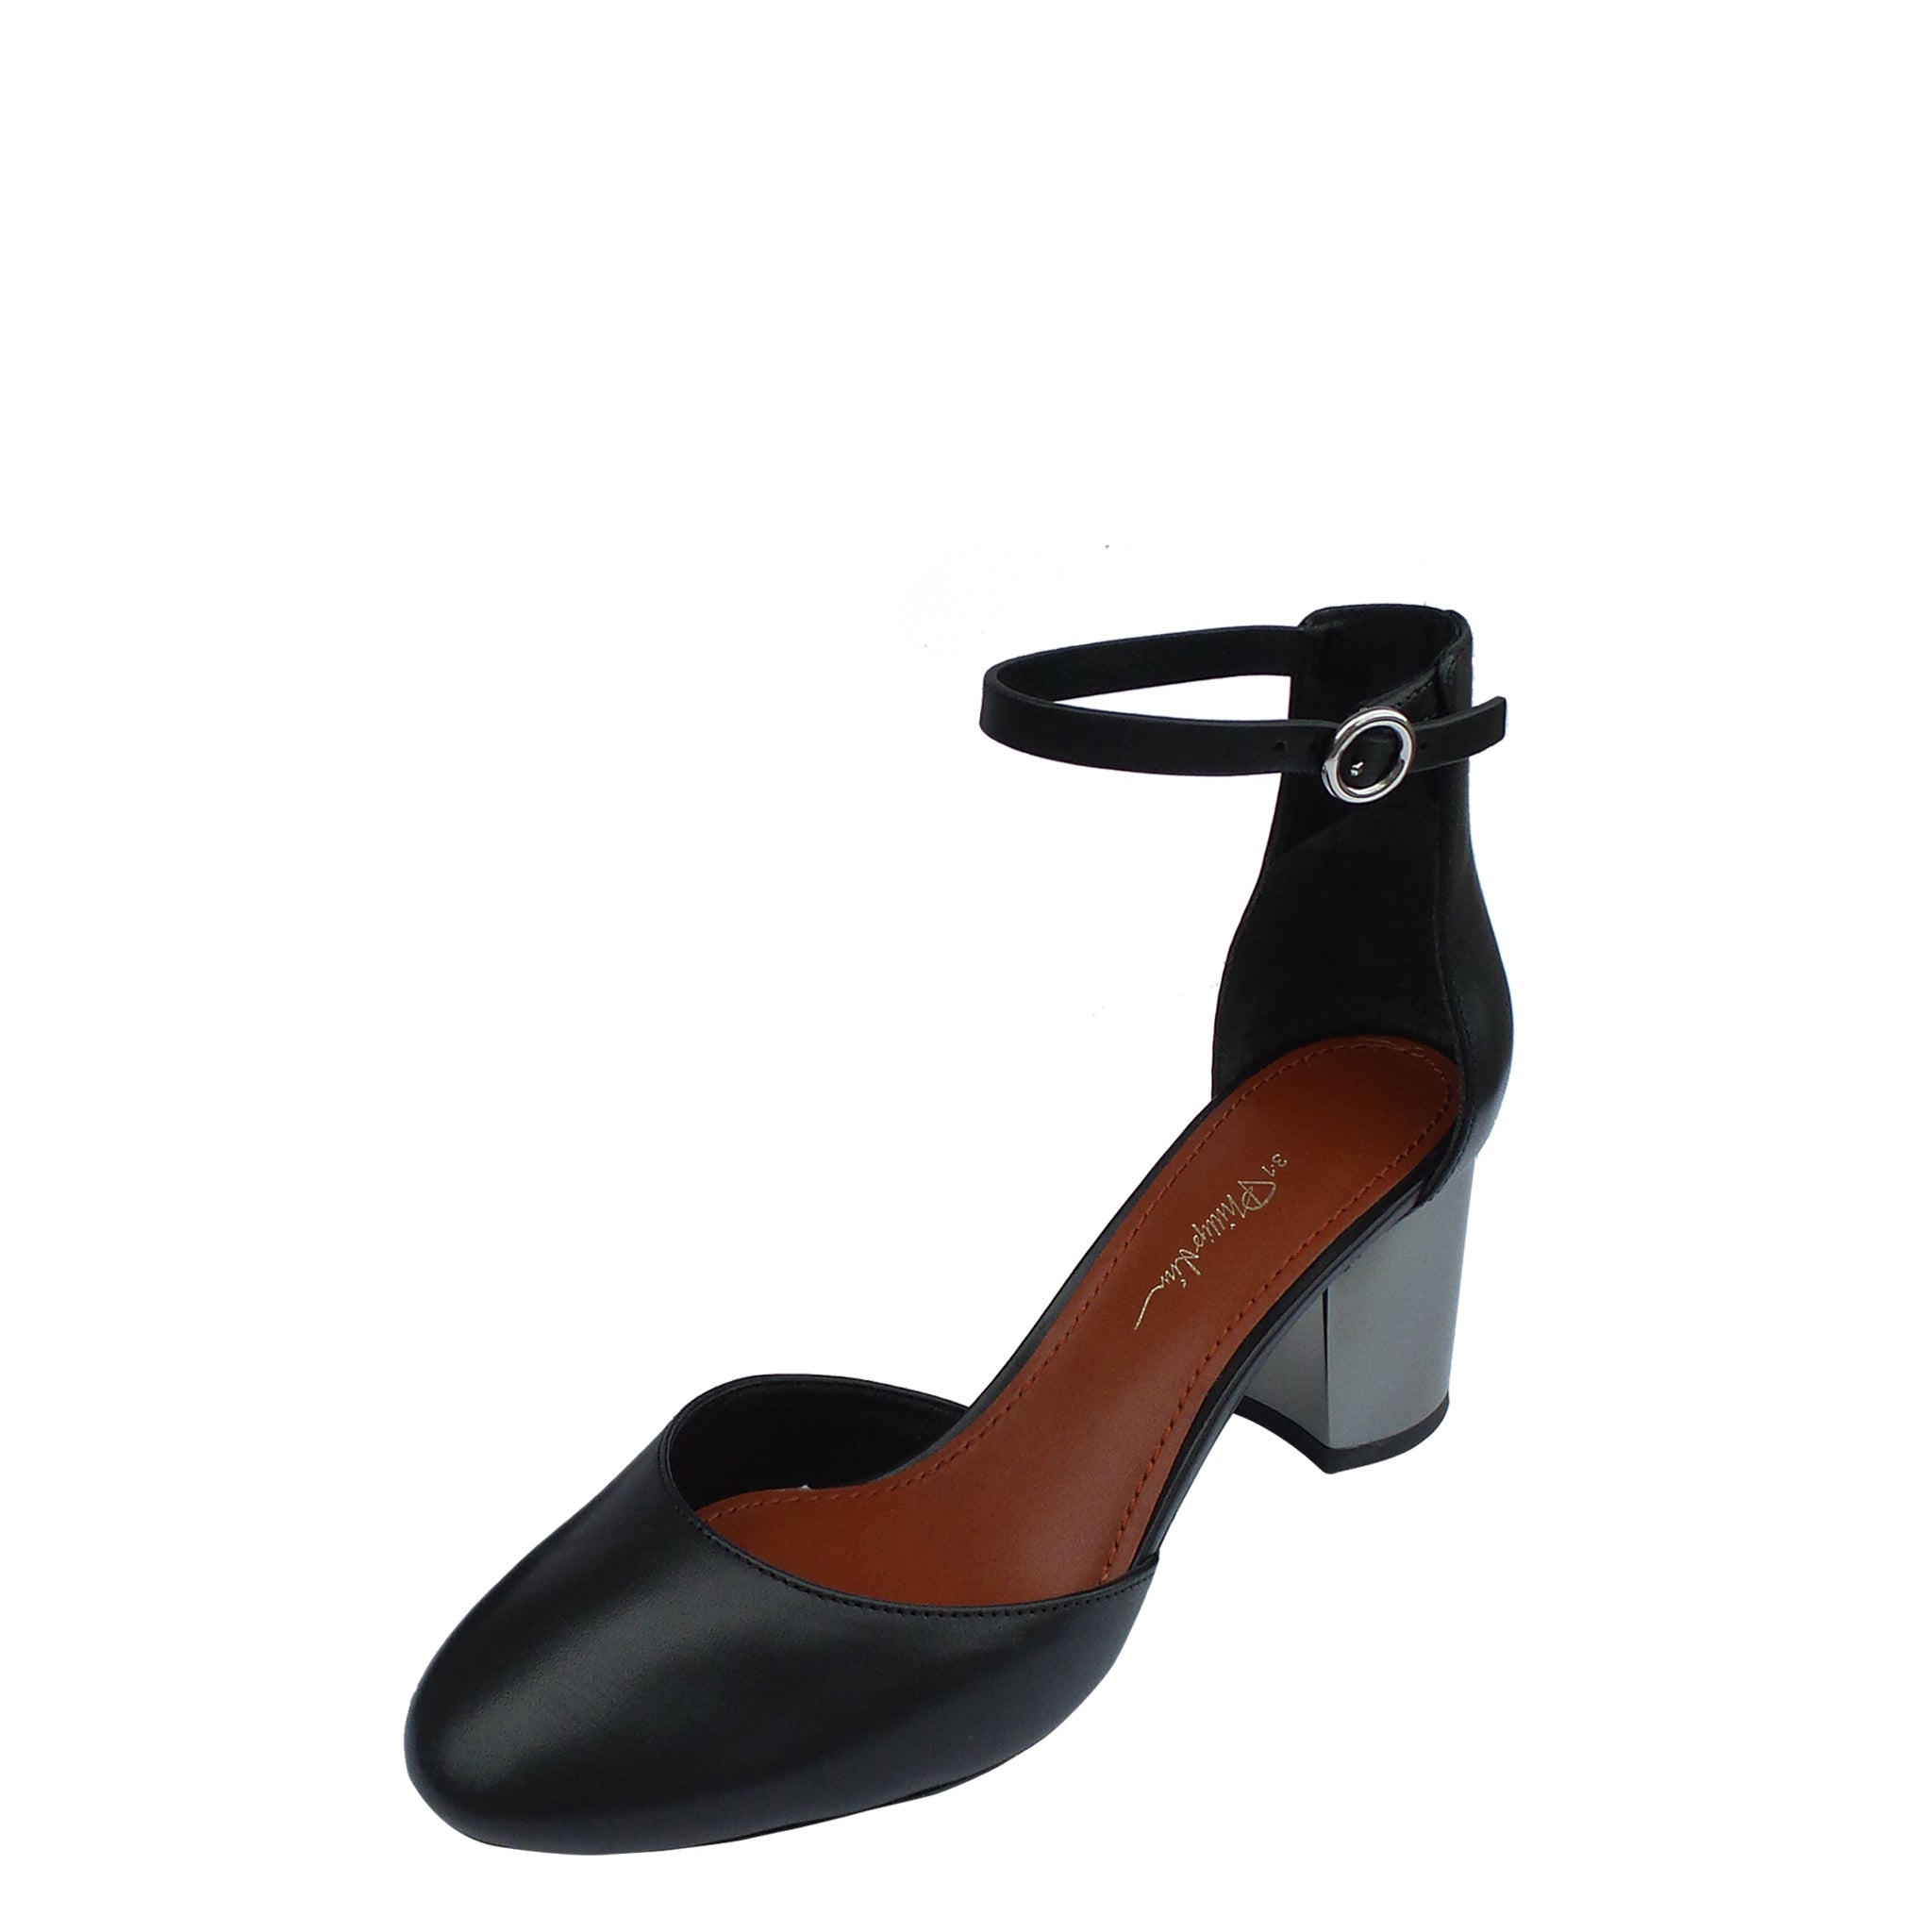 black block heel pumps with ankle strap